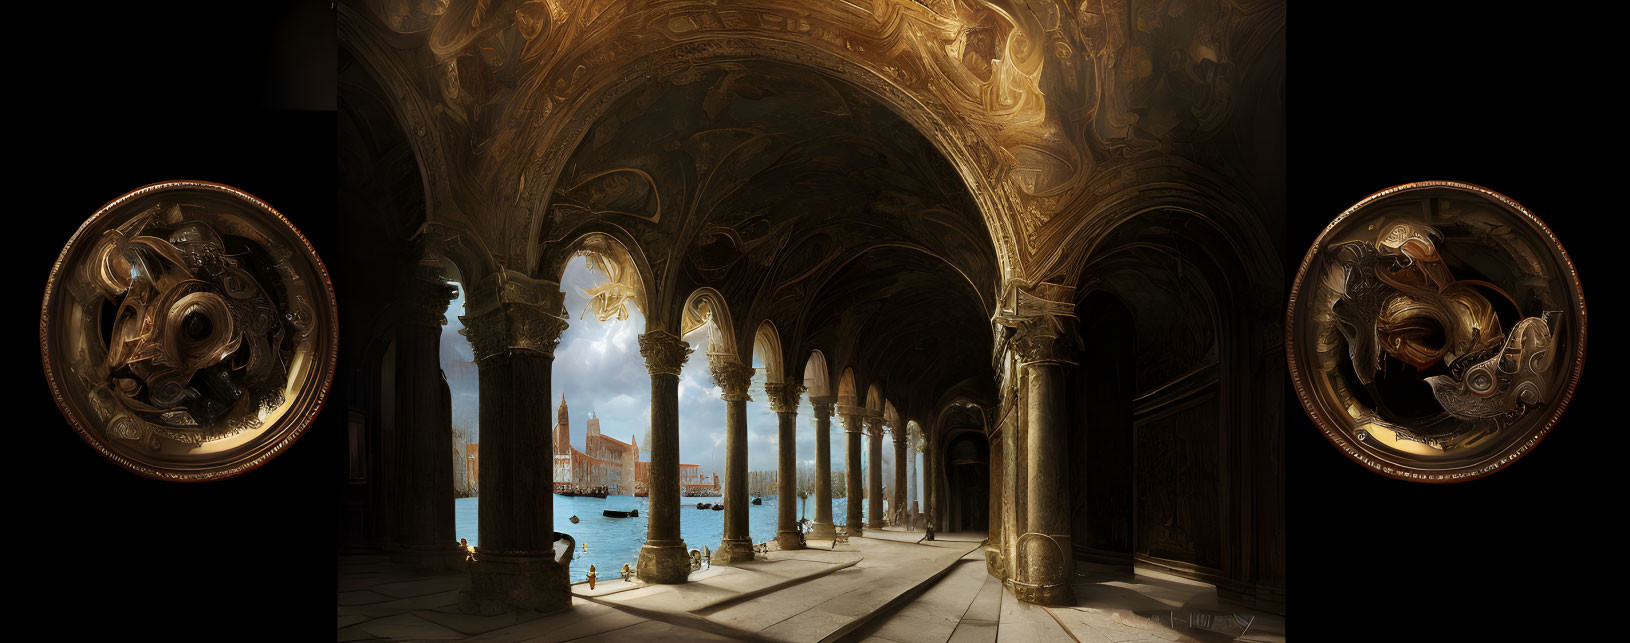 Baroque-style hallway with arched ceilings and columns overlooking serene water view.